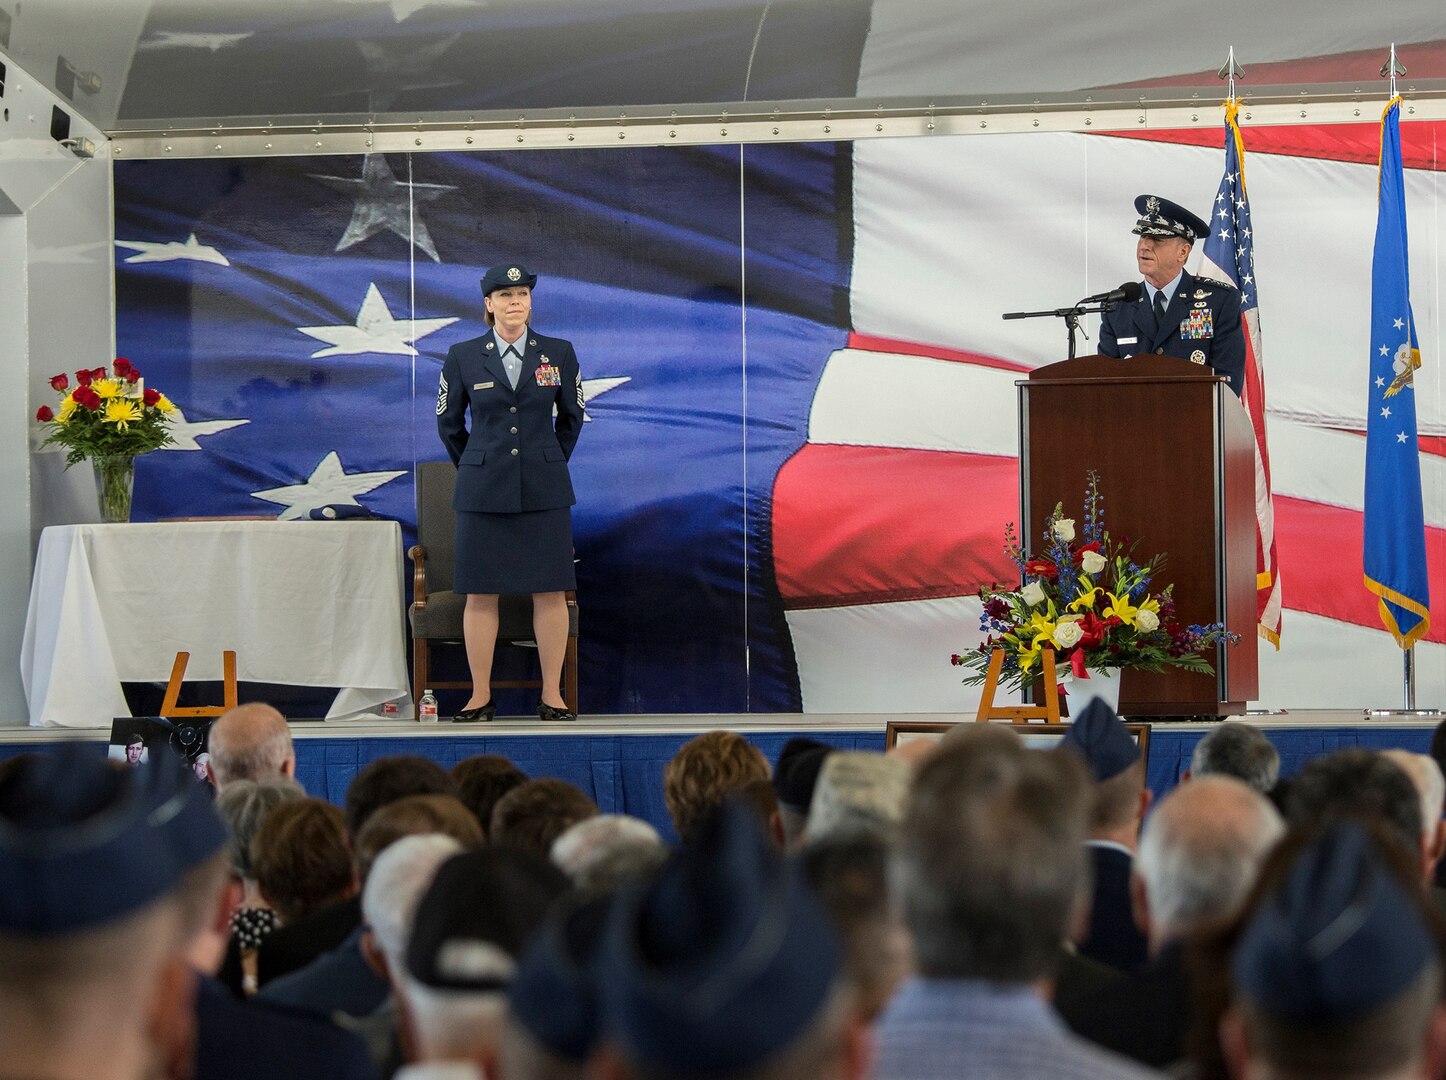 U.S. Air Force Chief of Staff Gen. David L. Goldfein addresses the family of retired U.S. Air Force Lt. Col. Richard “Dick” E. Cole during a memorial service at Joint Base San Antonio-Randolph April 18. Cole was the last surviving Doolittle Raider who took part in the storied World War II raid on Tokyo and was a founding Airman of the USAF Special Operations community.